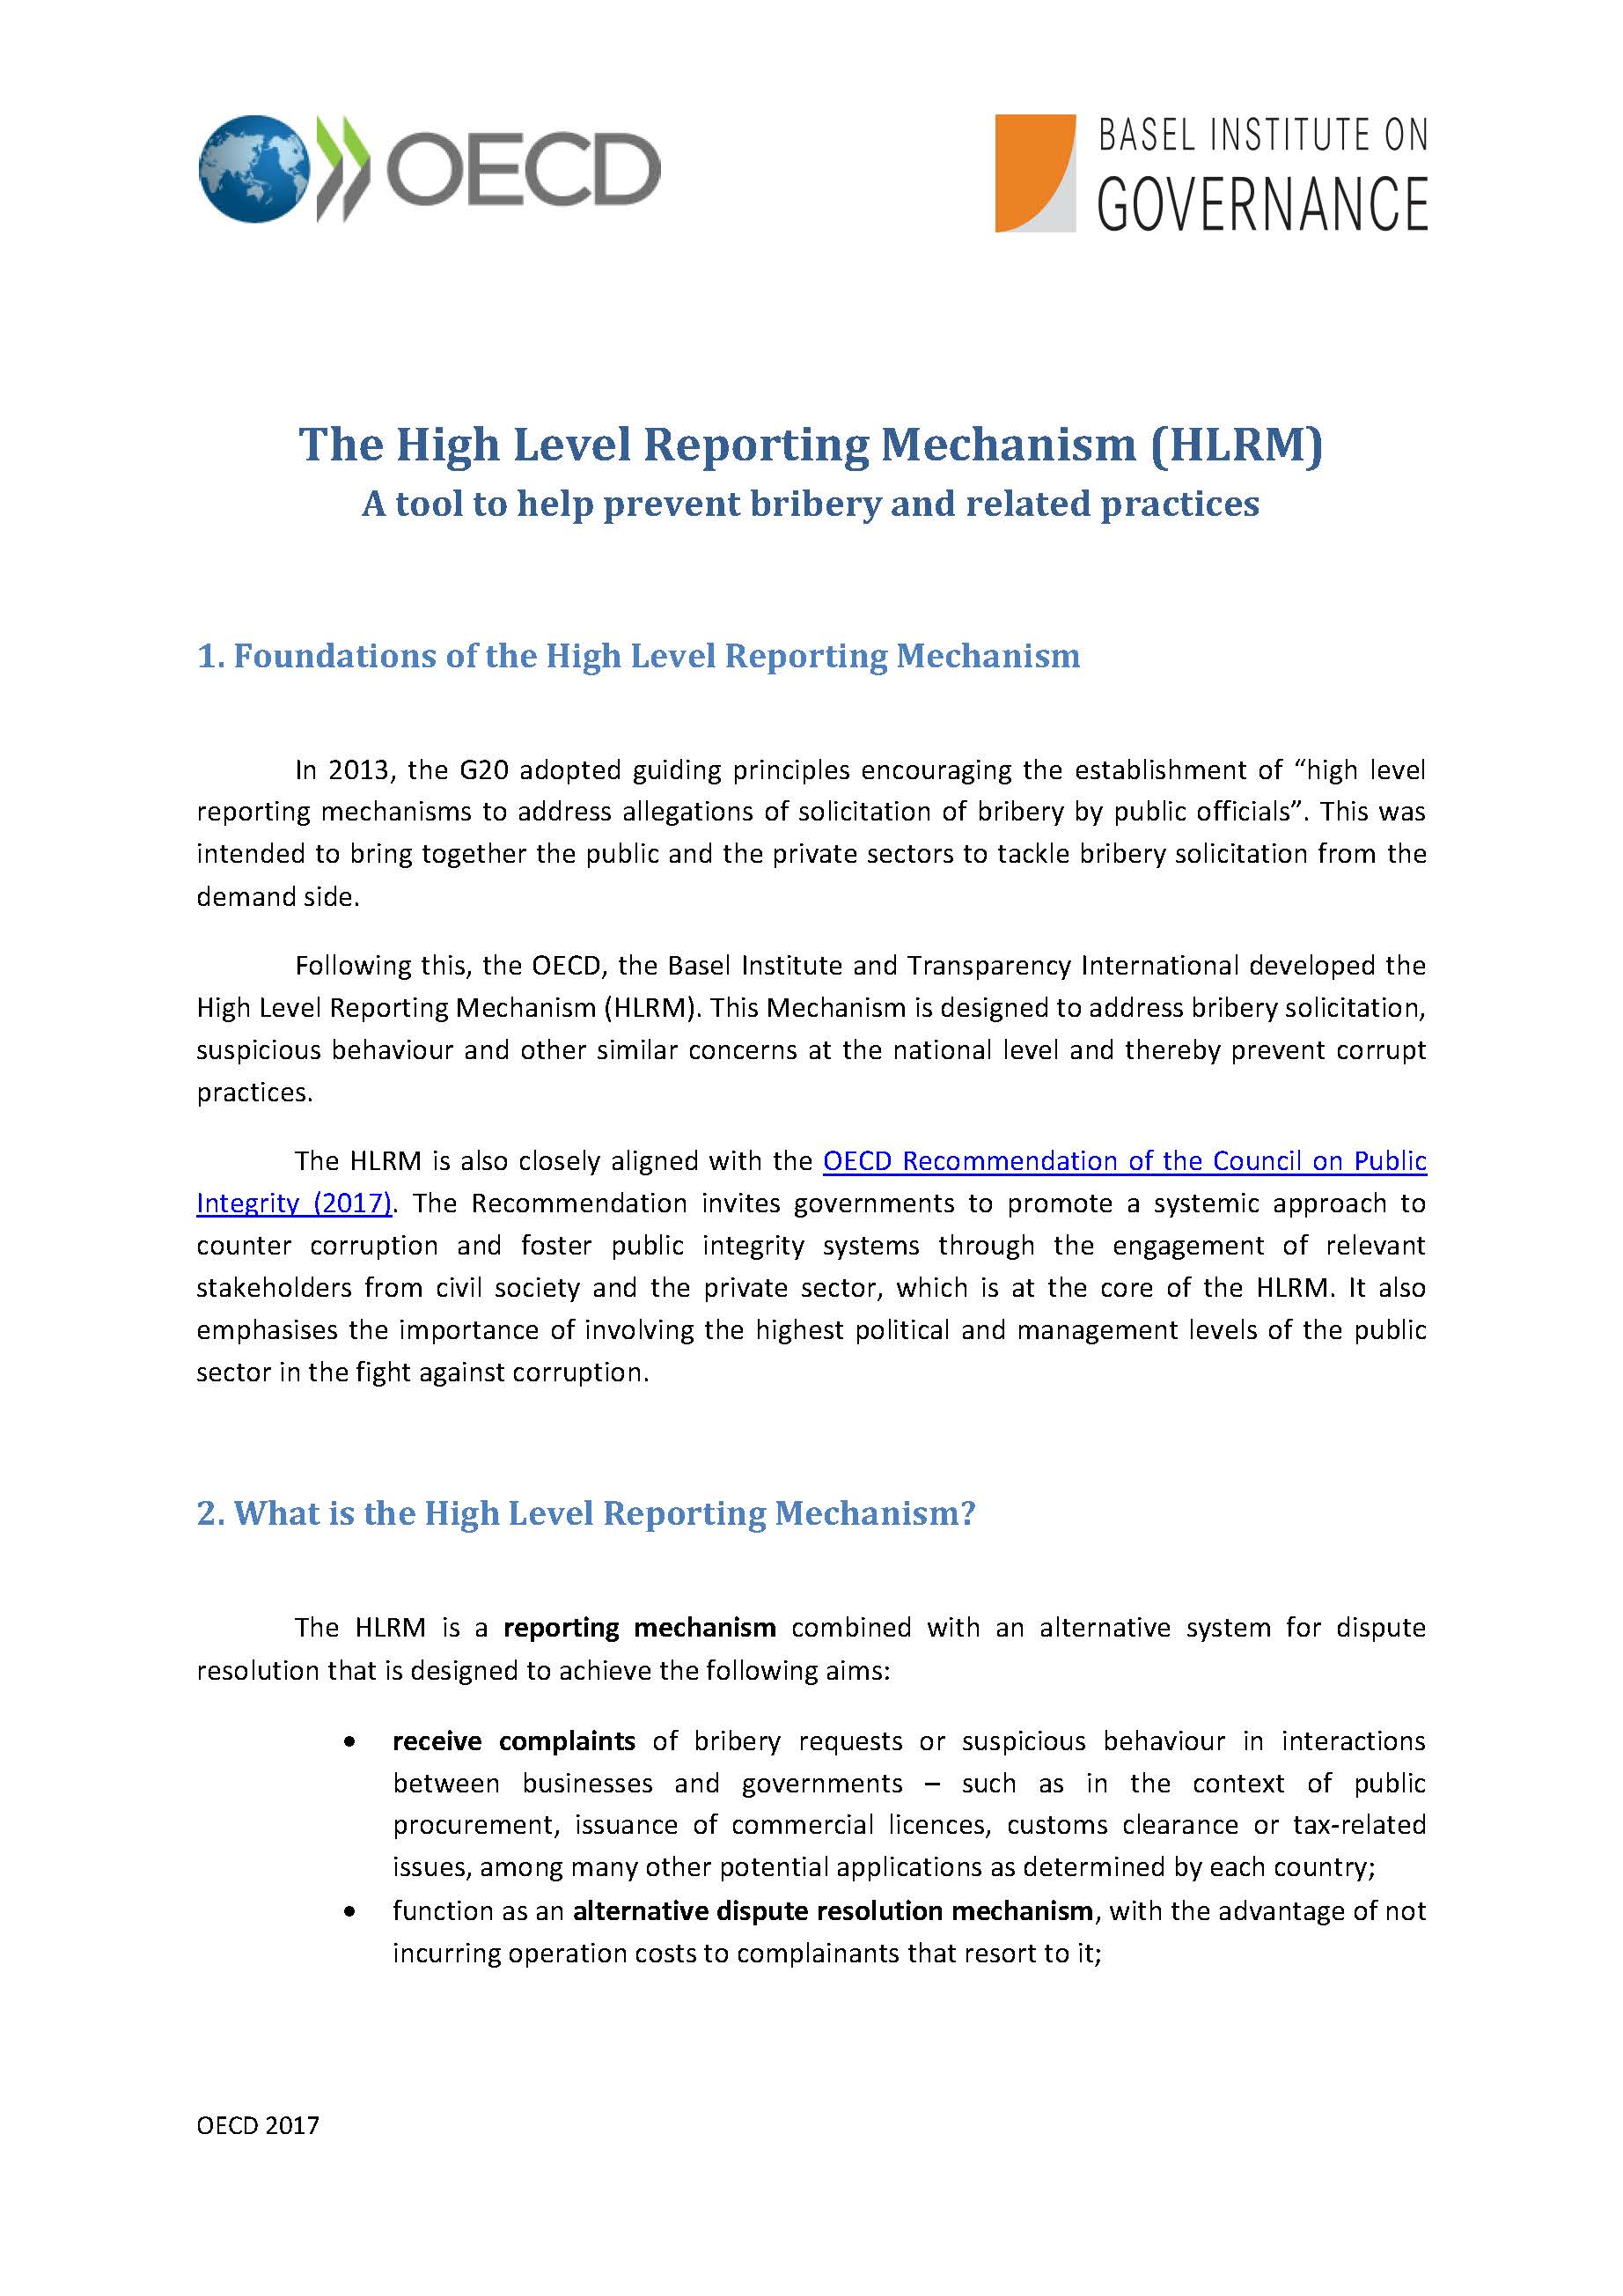 High Level Reporting Mechanism 2017 overview - page 1